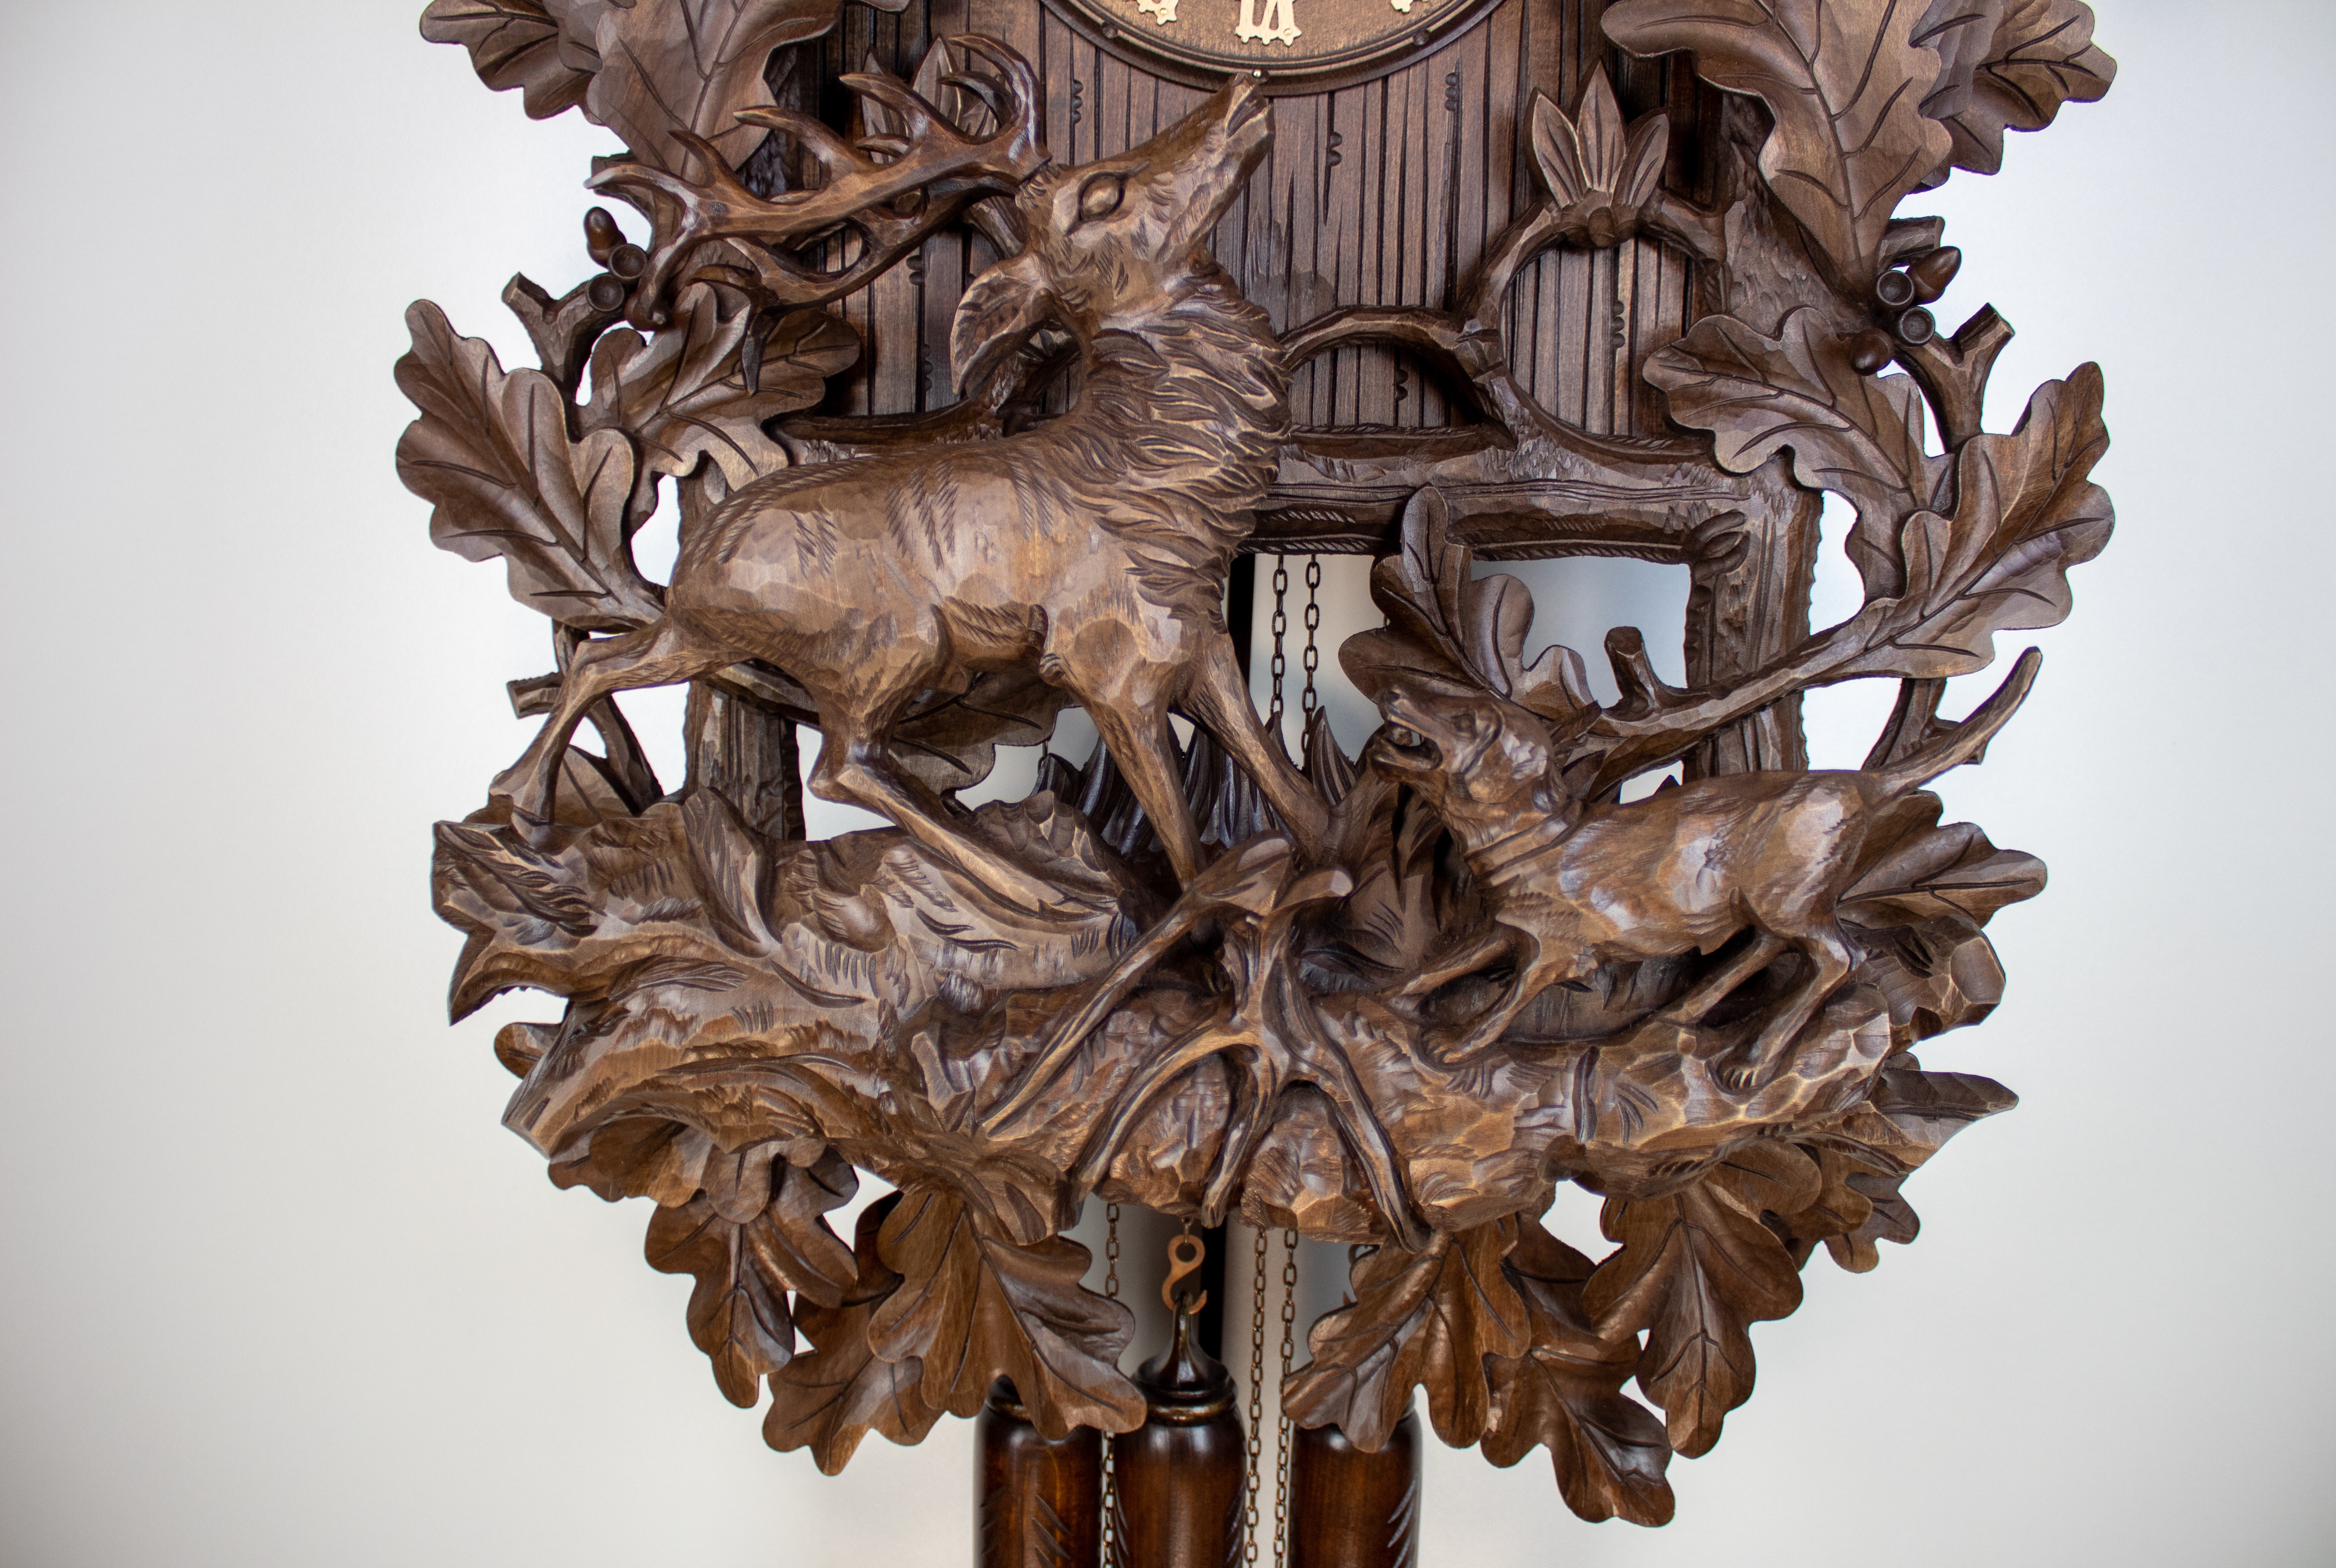 Historical 8 Days Music Dancer Cuckoo Clock with eagle and hunting scene with deer and hunting dog